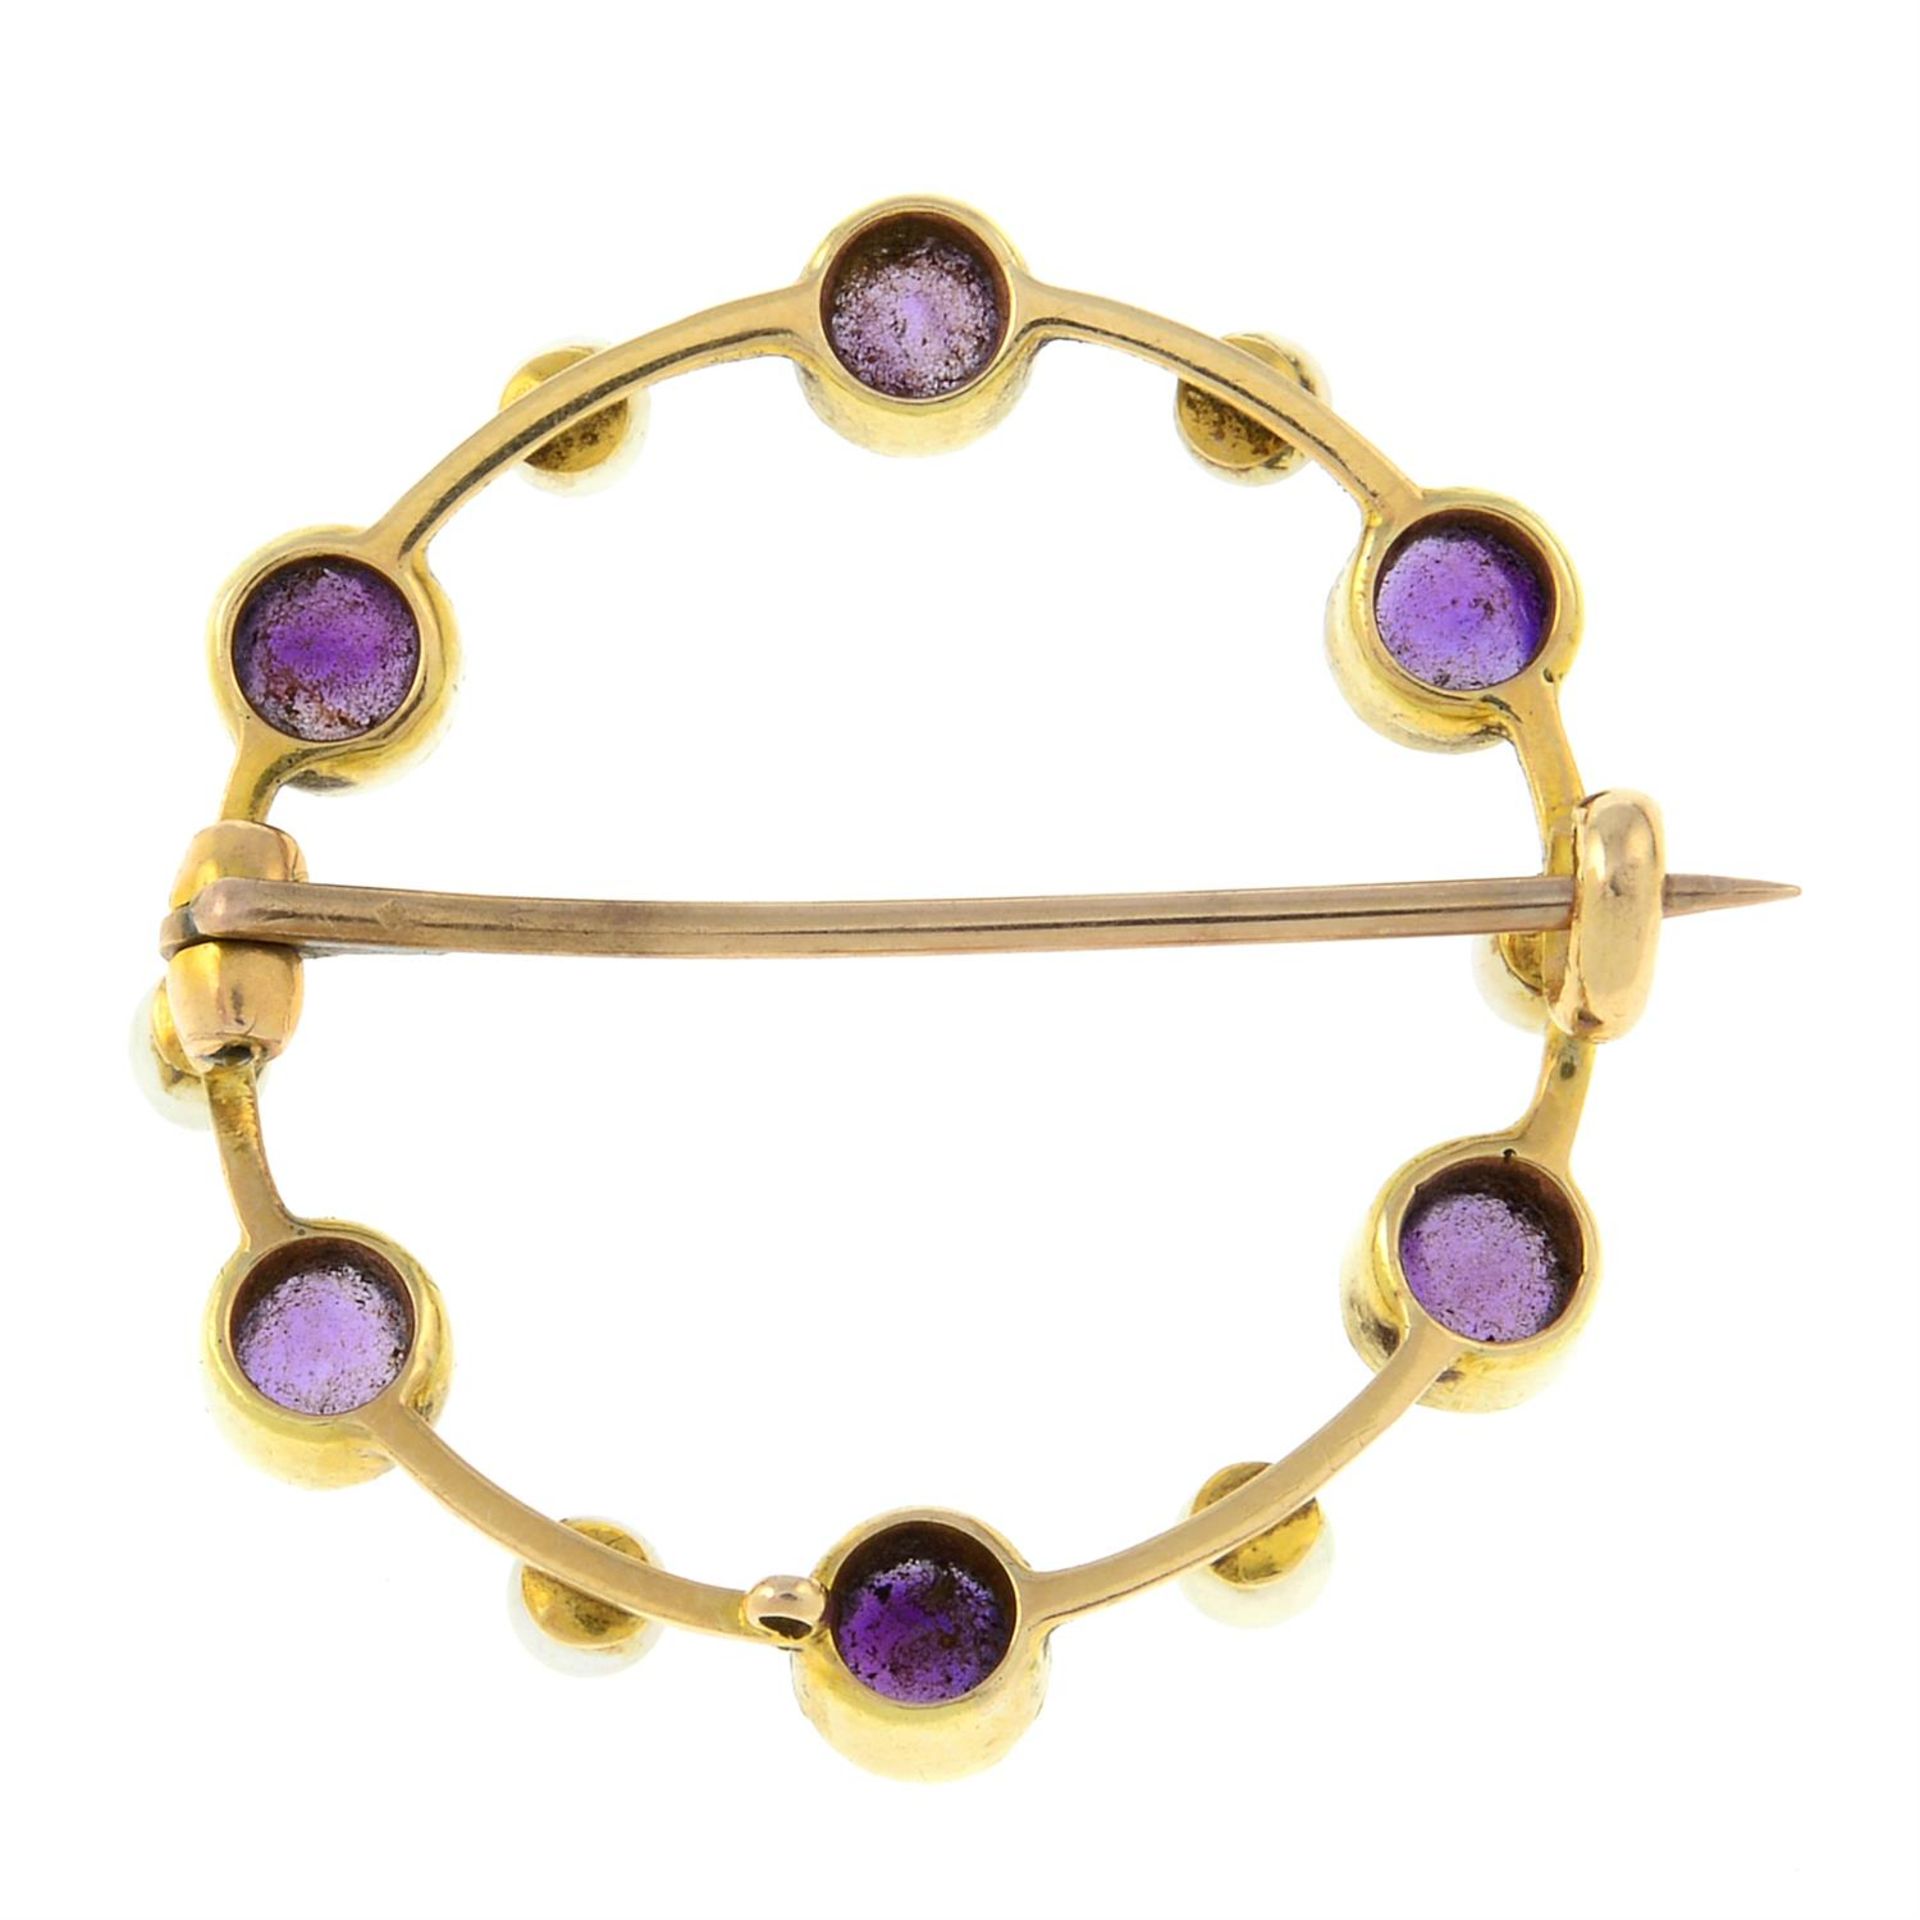 An early 20th century 9ct gold amethyst and seed pearl wreath brooch. - Image 2 of 2